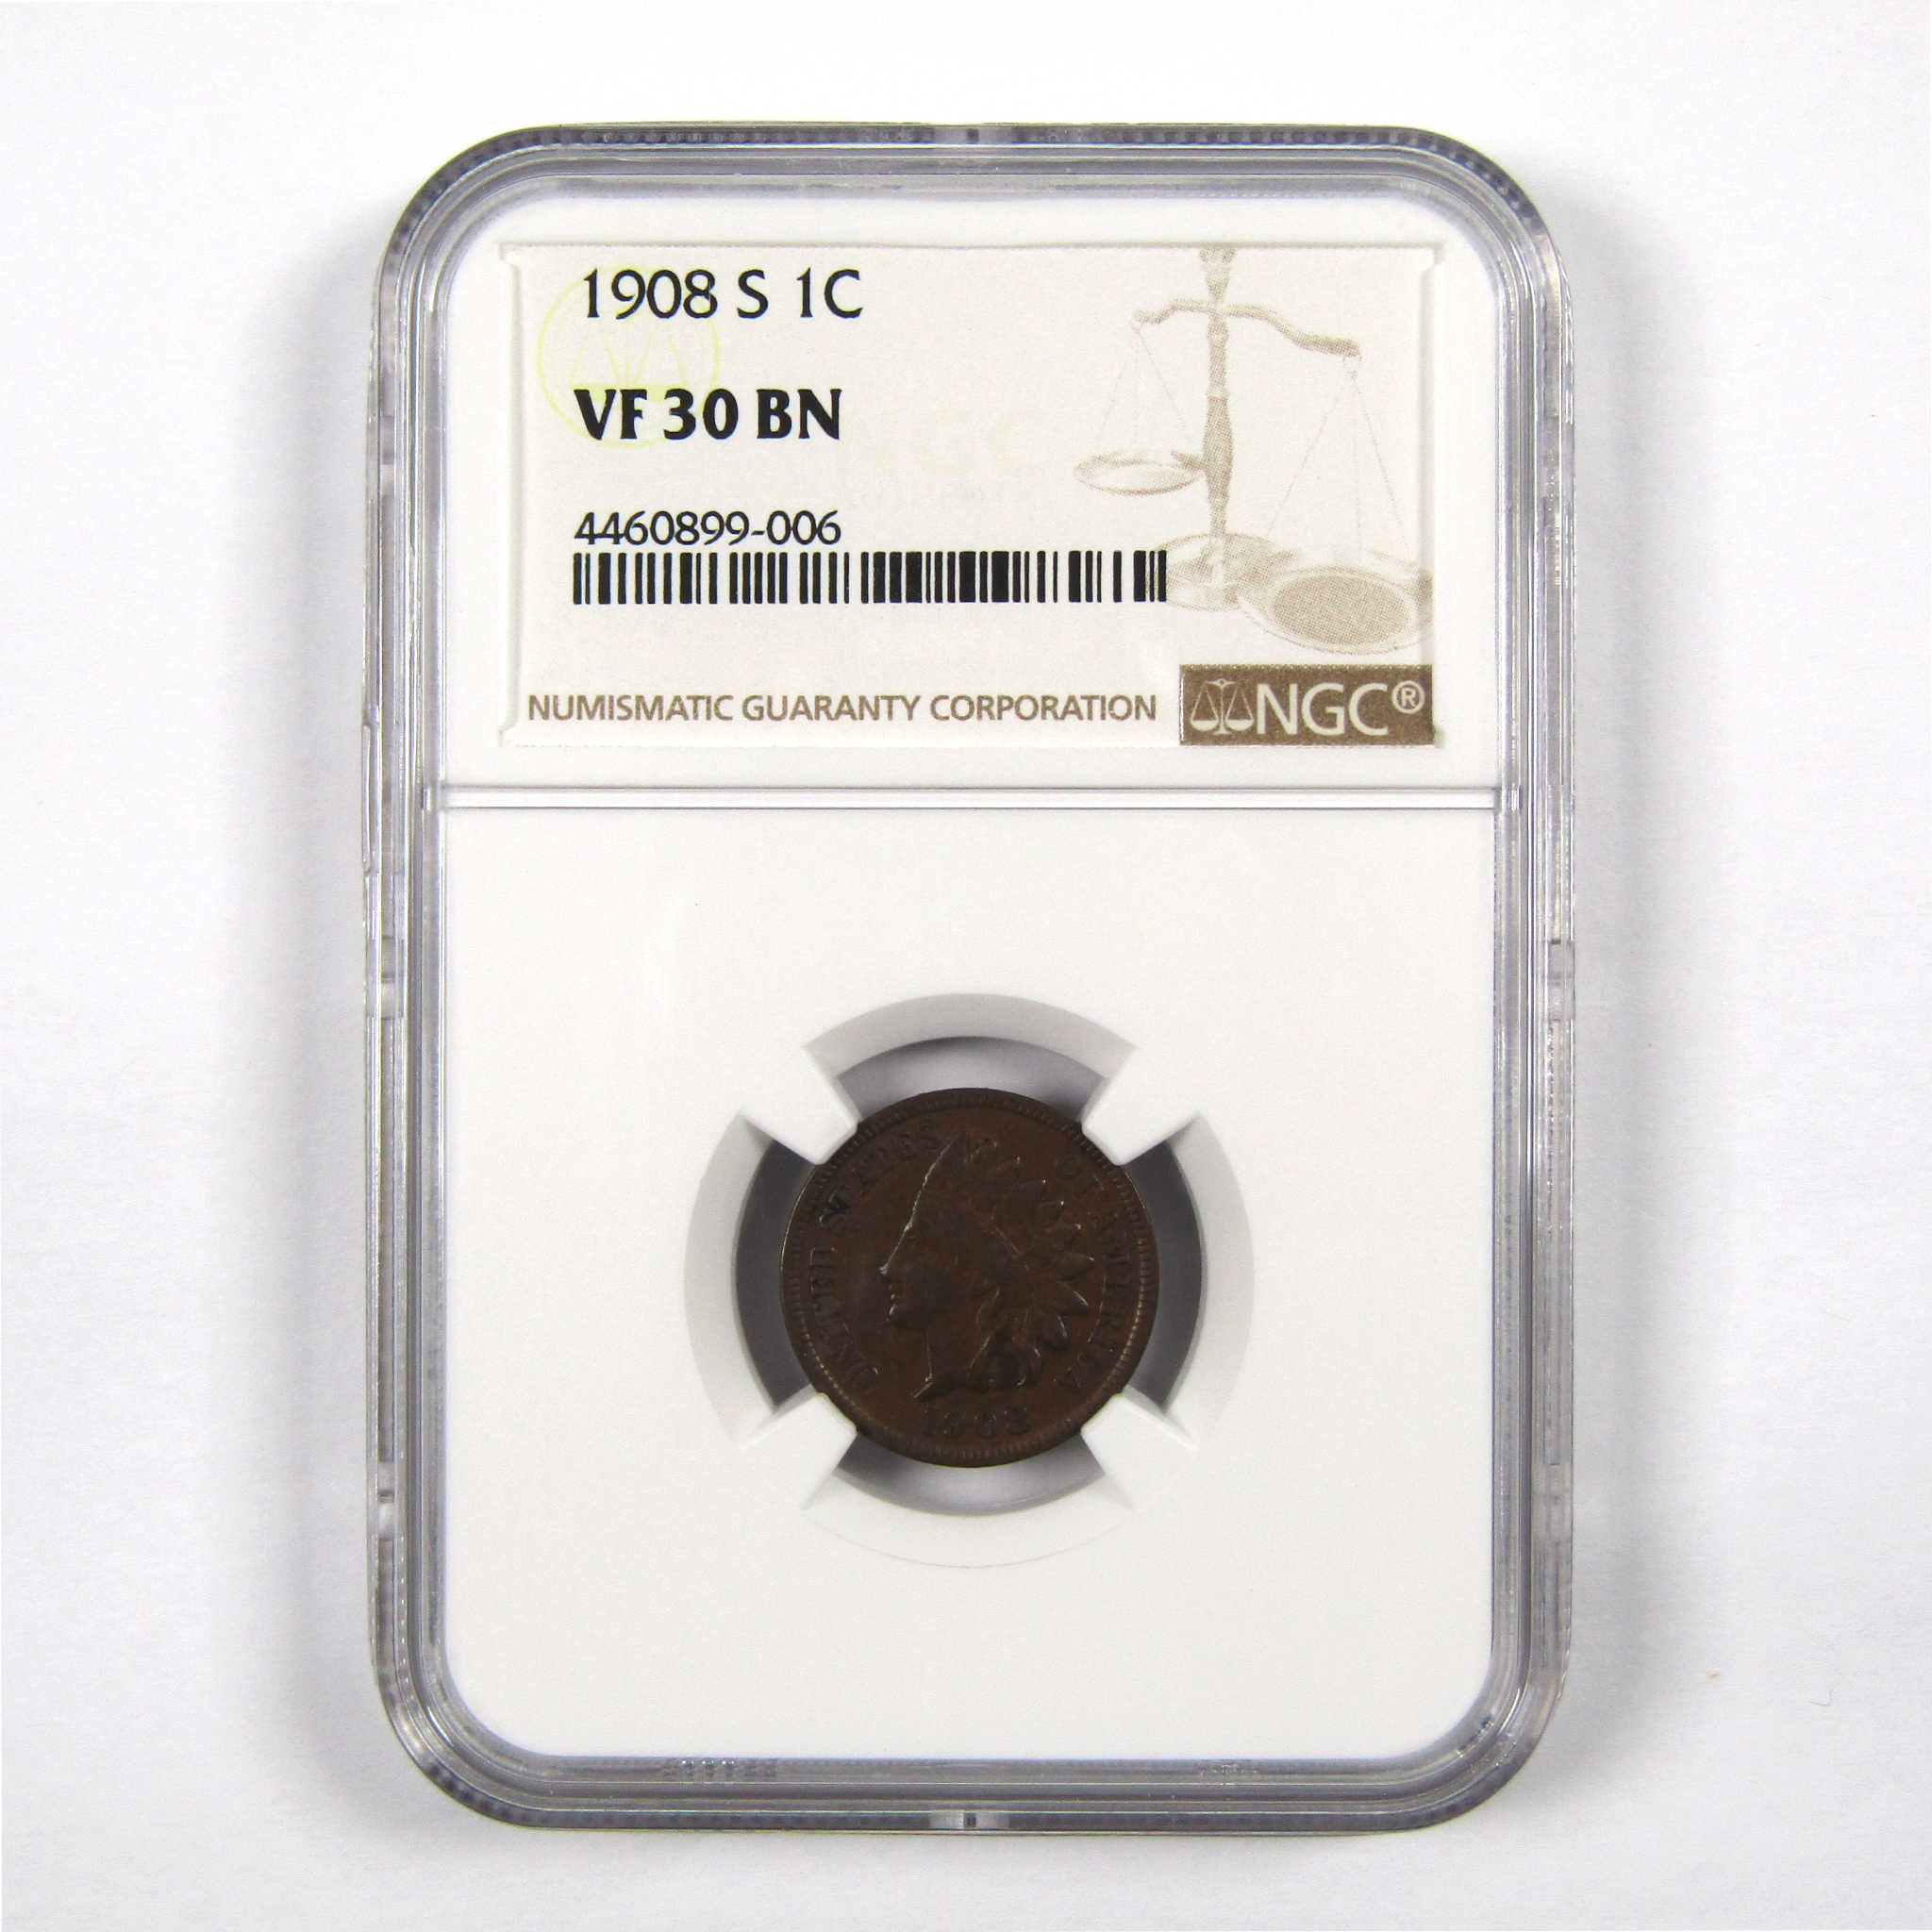 1908 S Indian Head Cent VF 30 BN NGC Penny 1c Coin SKU:I9191